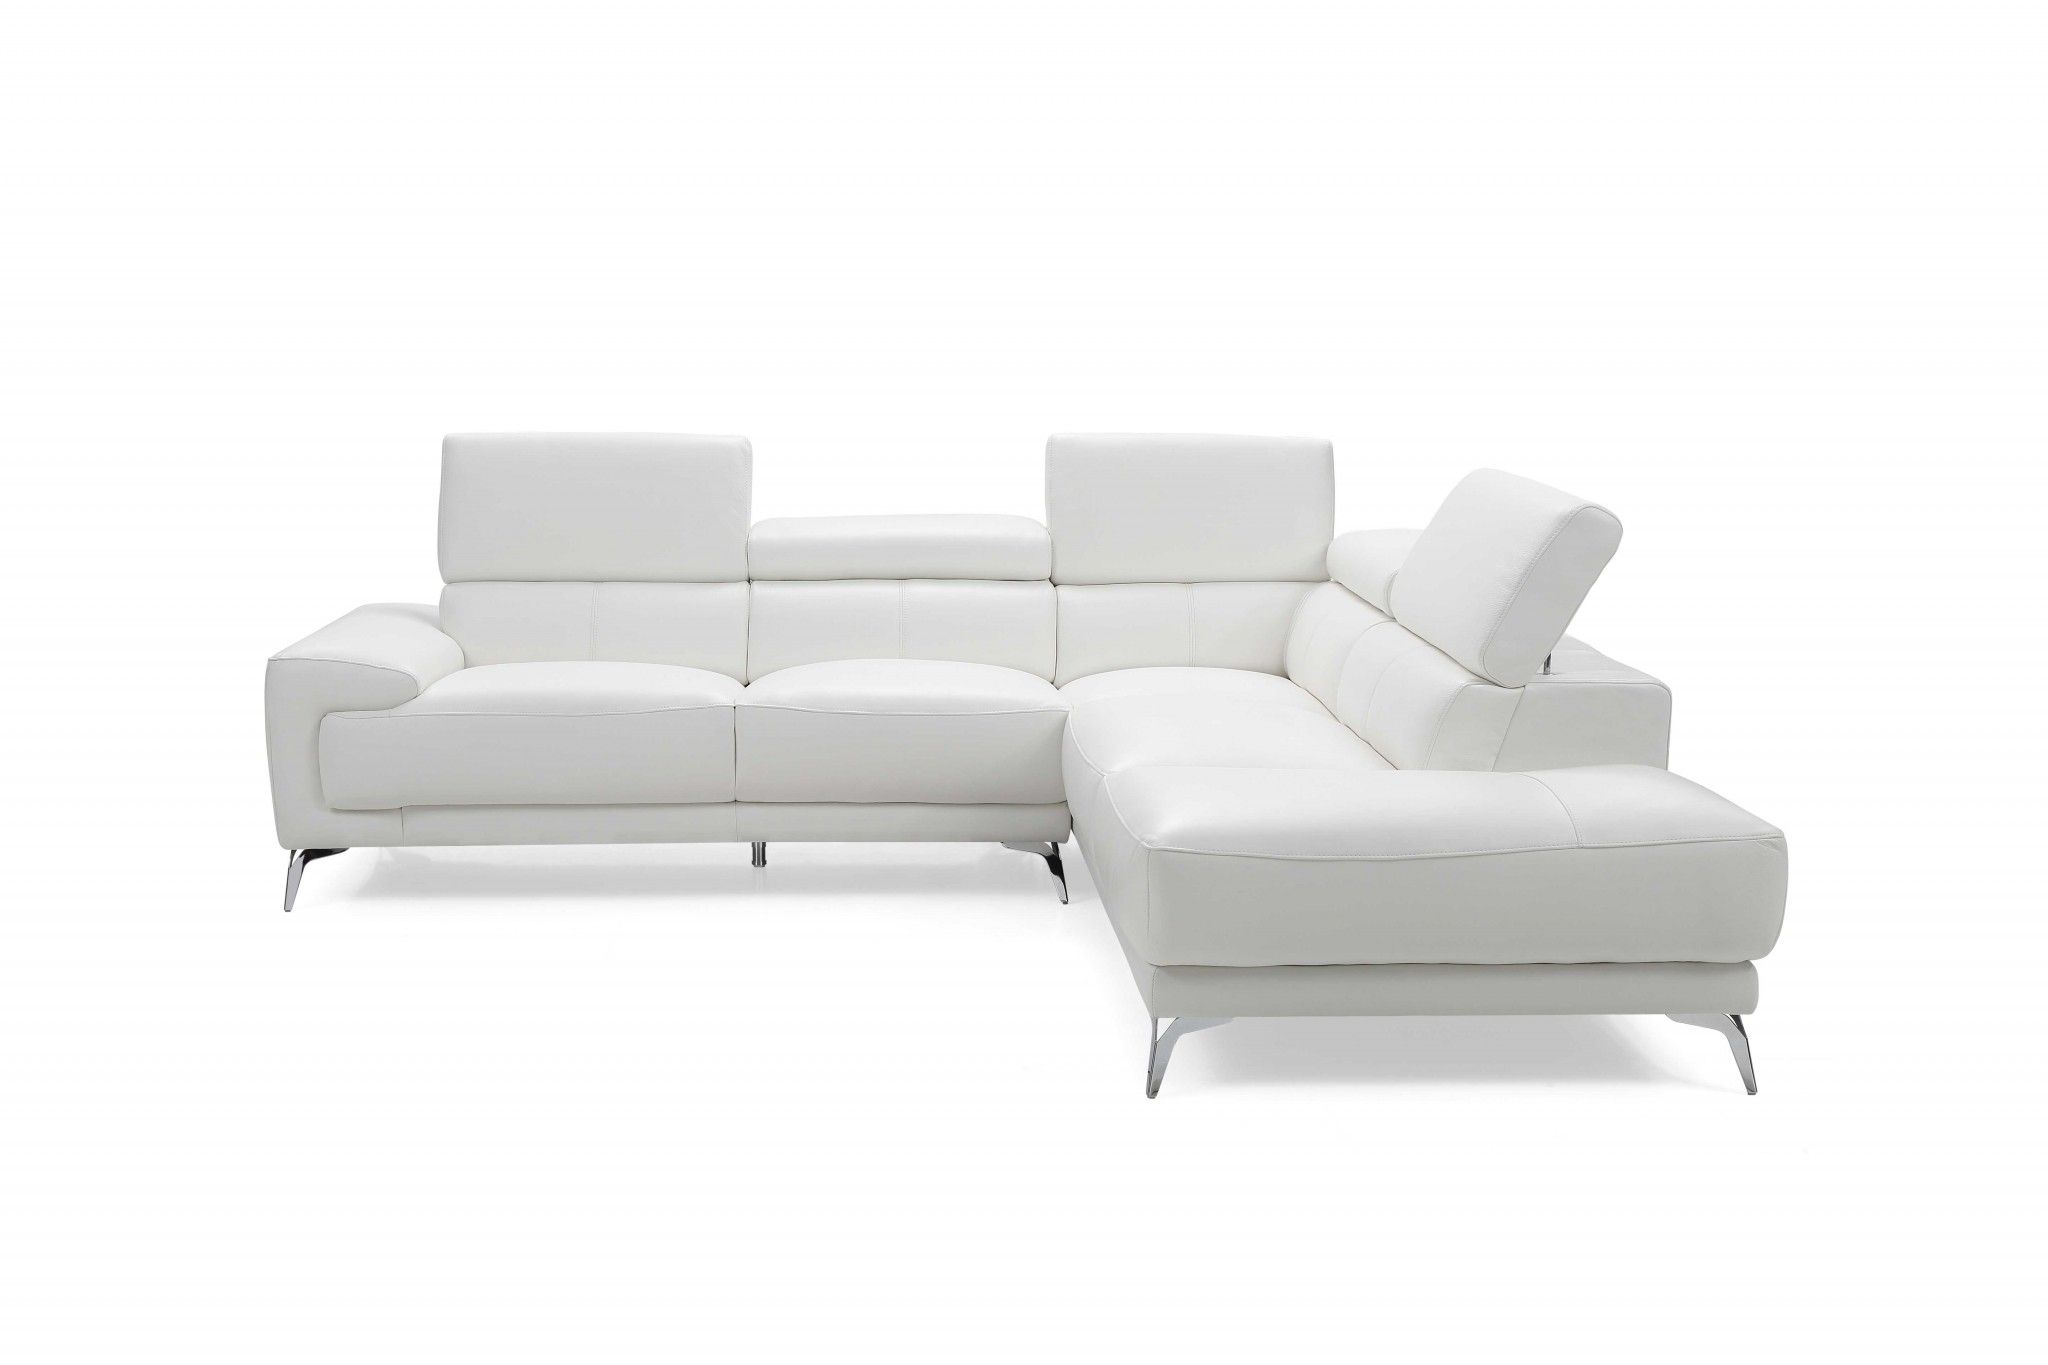 Sectional, Chaise On Right When Facing, White Top Grain Intended For [%matilda 100% Top Grain Leather Chaise Sectional Sofas|matilda 100% Top Grain Leather Chaise Sectional Sofas%] (View 8 of 15)